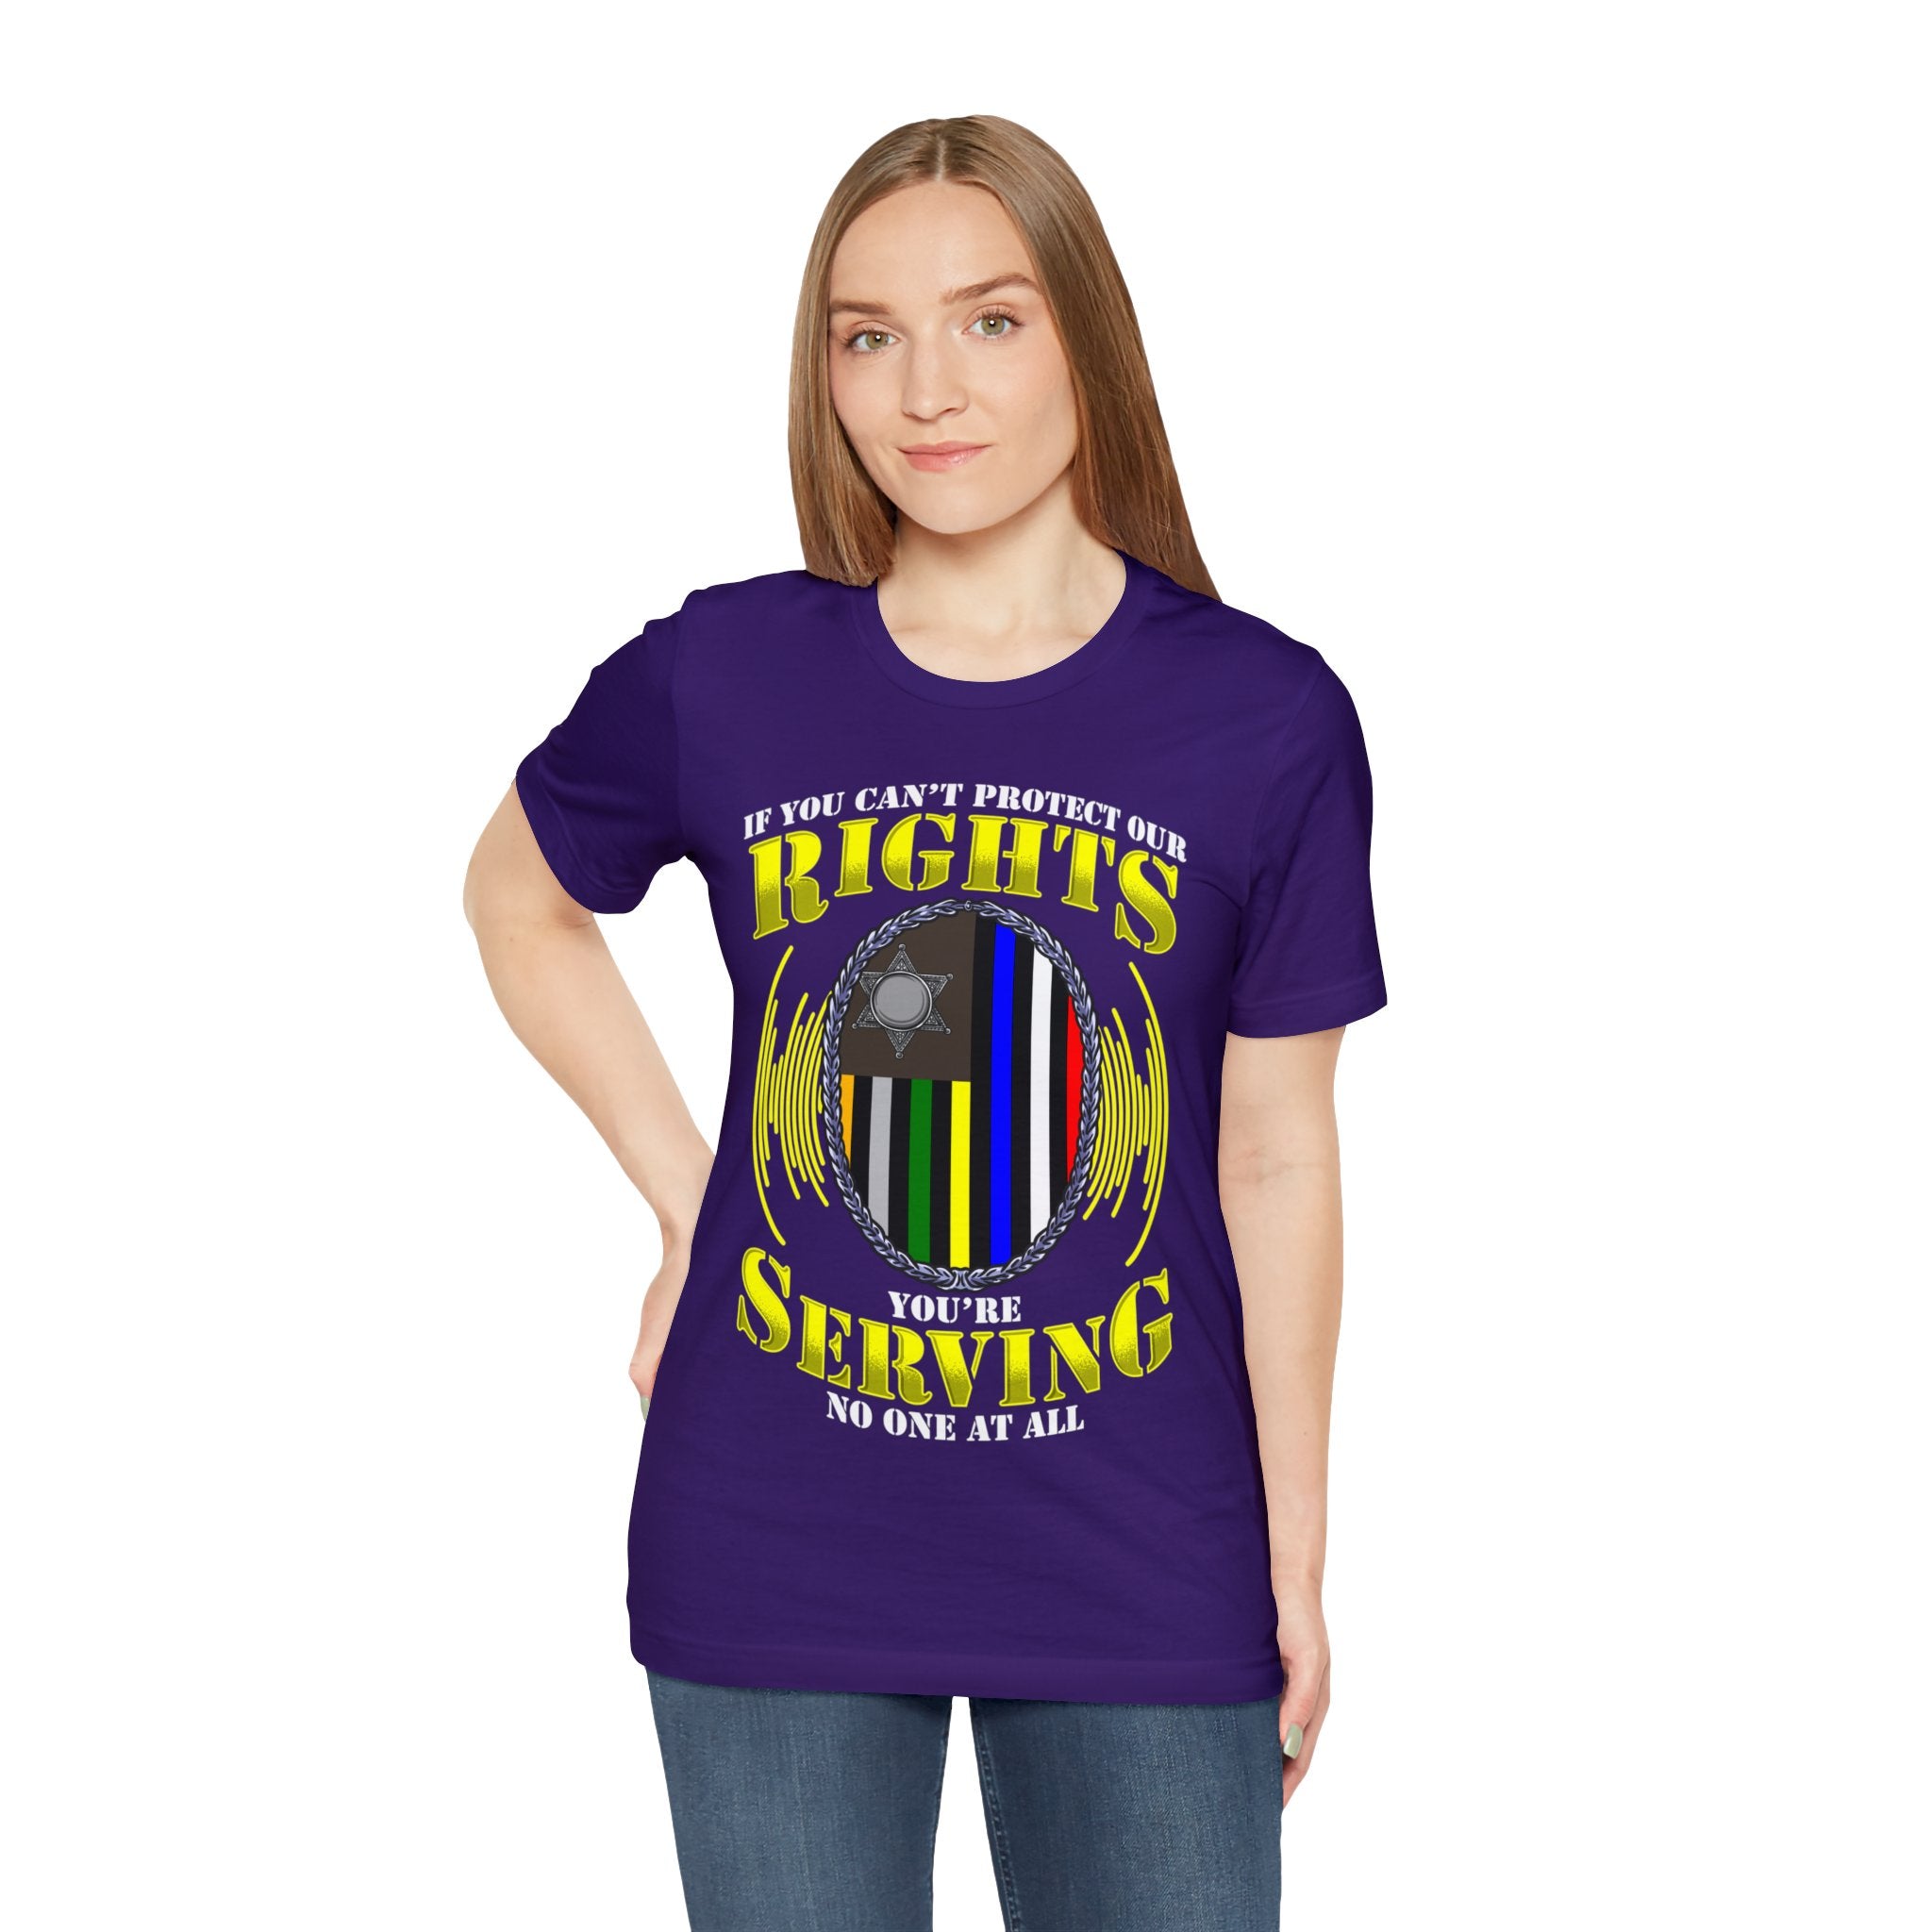 Thin Communications Line Tee - Rights/Serving